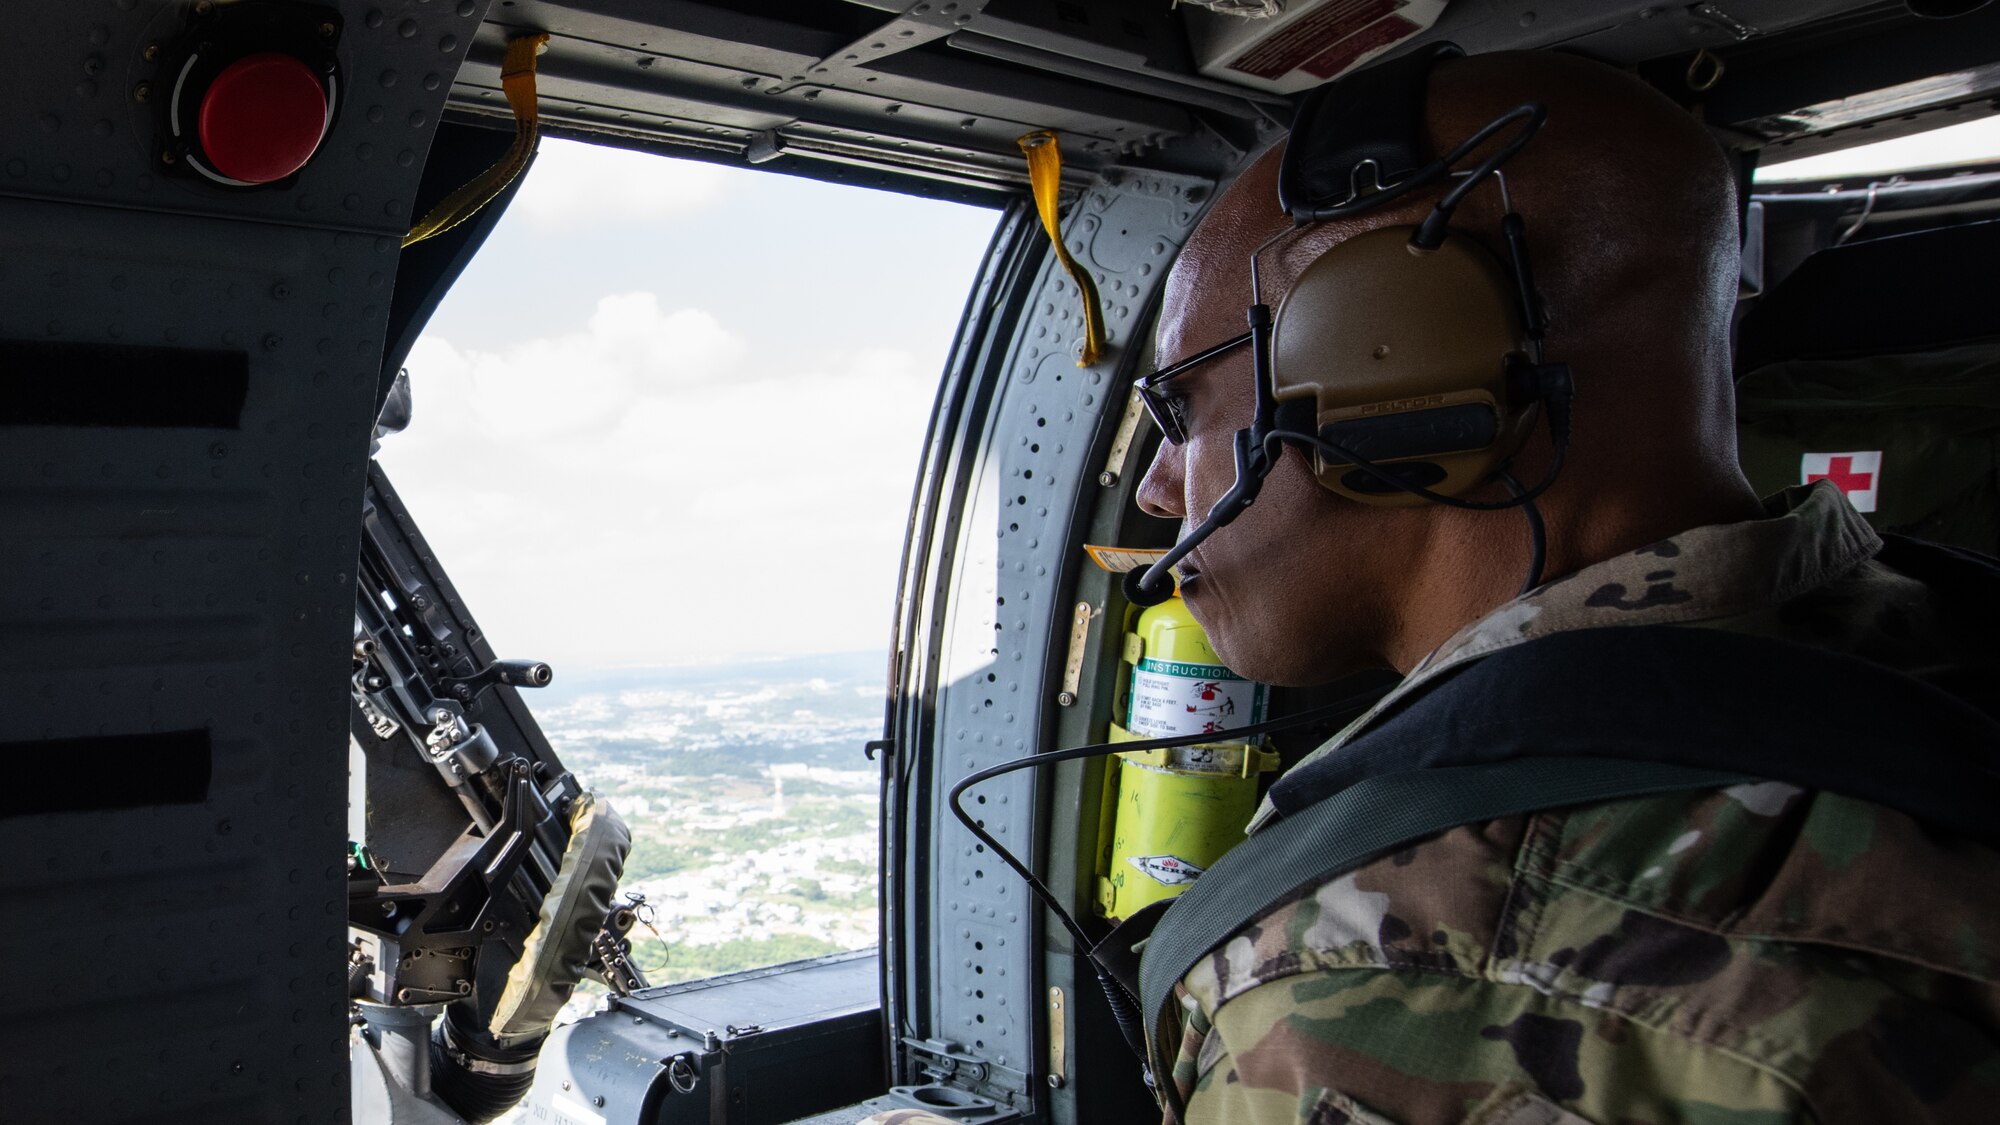 U.S. Air Force Gen. CQ Brown, Jr., Pacific Air Forces commander, looks out the window of an HH-60 Pave Hawk during an aerial tour of Kadena Air Base, Japan, Nov. 12, 2019. During the tour, Brown visited various base squadrons and agencies to learn about unit-specific issues, their operations, and answer questions. (U.S. Air Force photo by Staff Sgt. Benjamin Raughton)